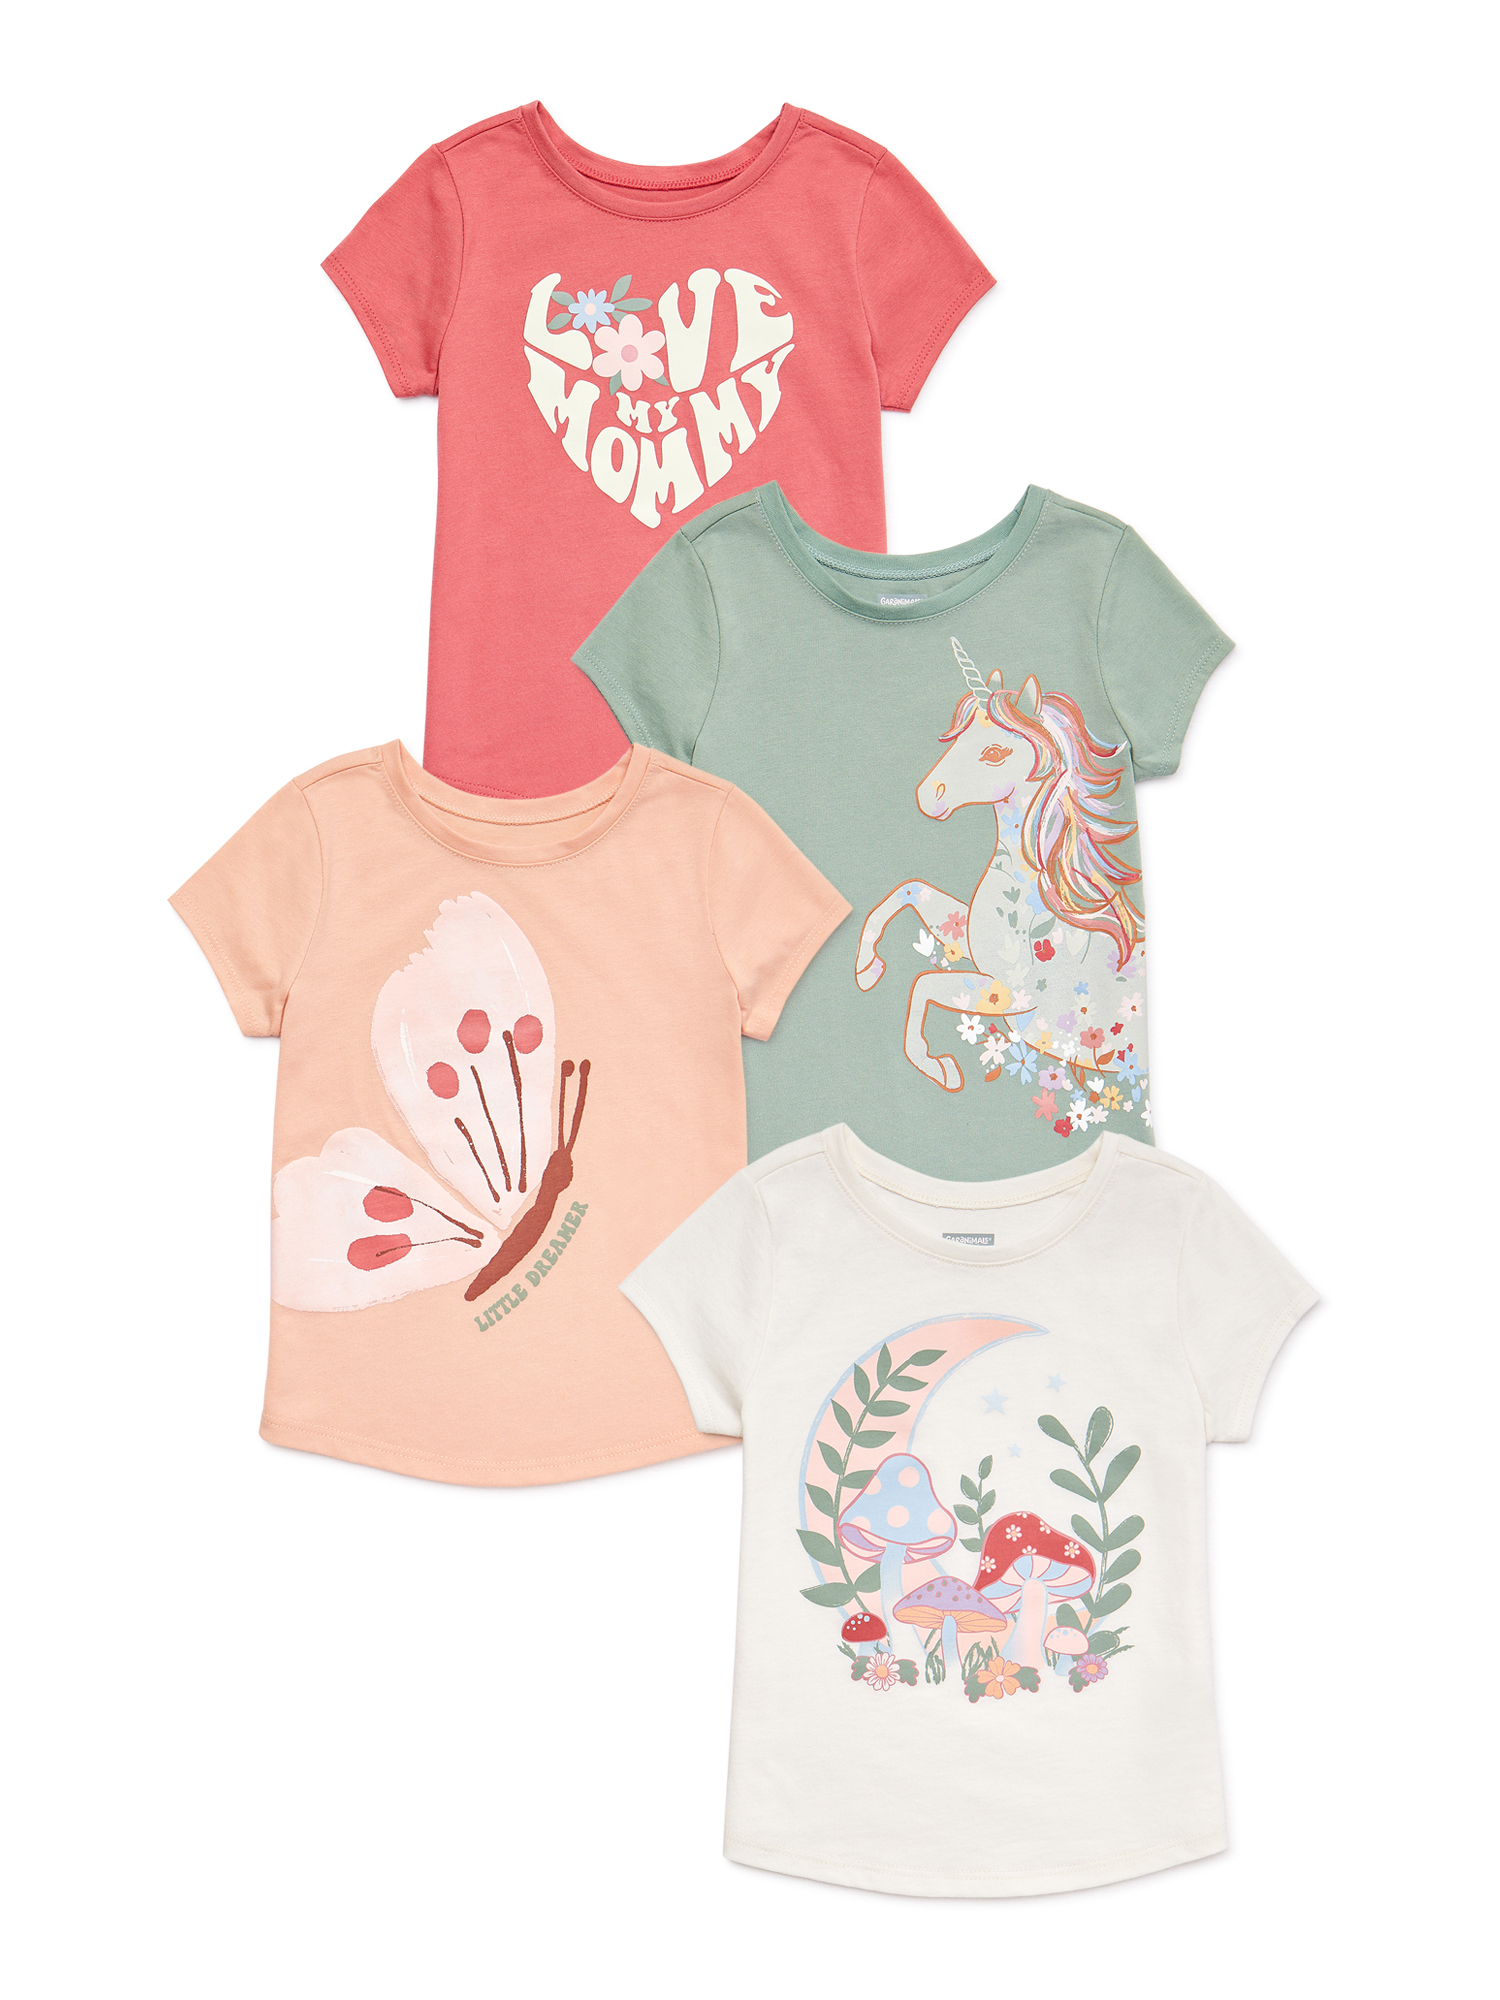 Garanimals Baby and Toddler Girls Short Sleeve Graphic Tee, 4-Pack, Sizes 12 Months-5T